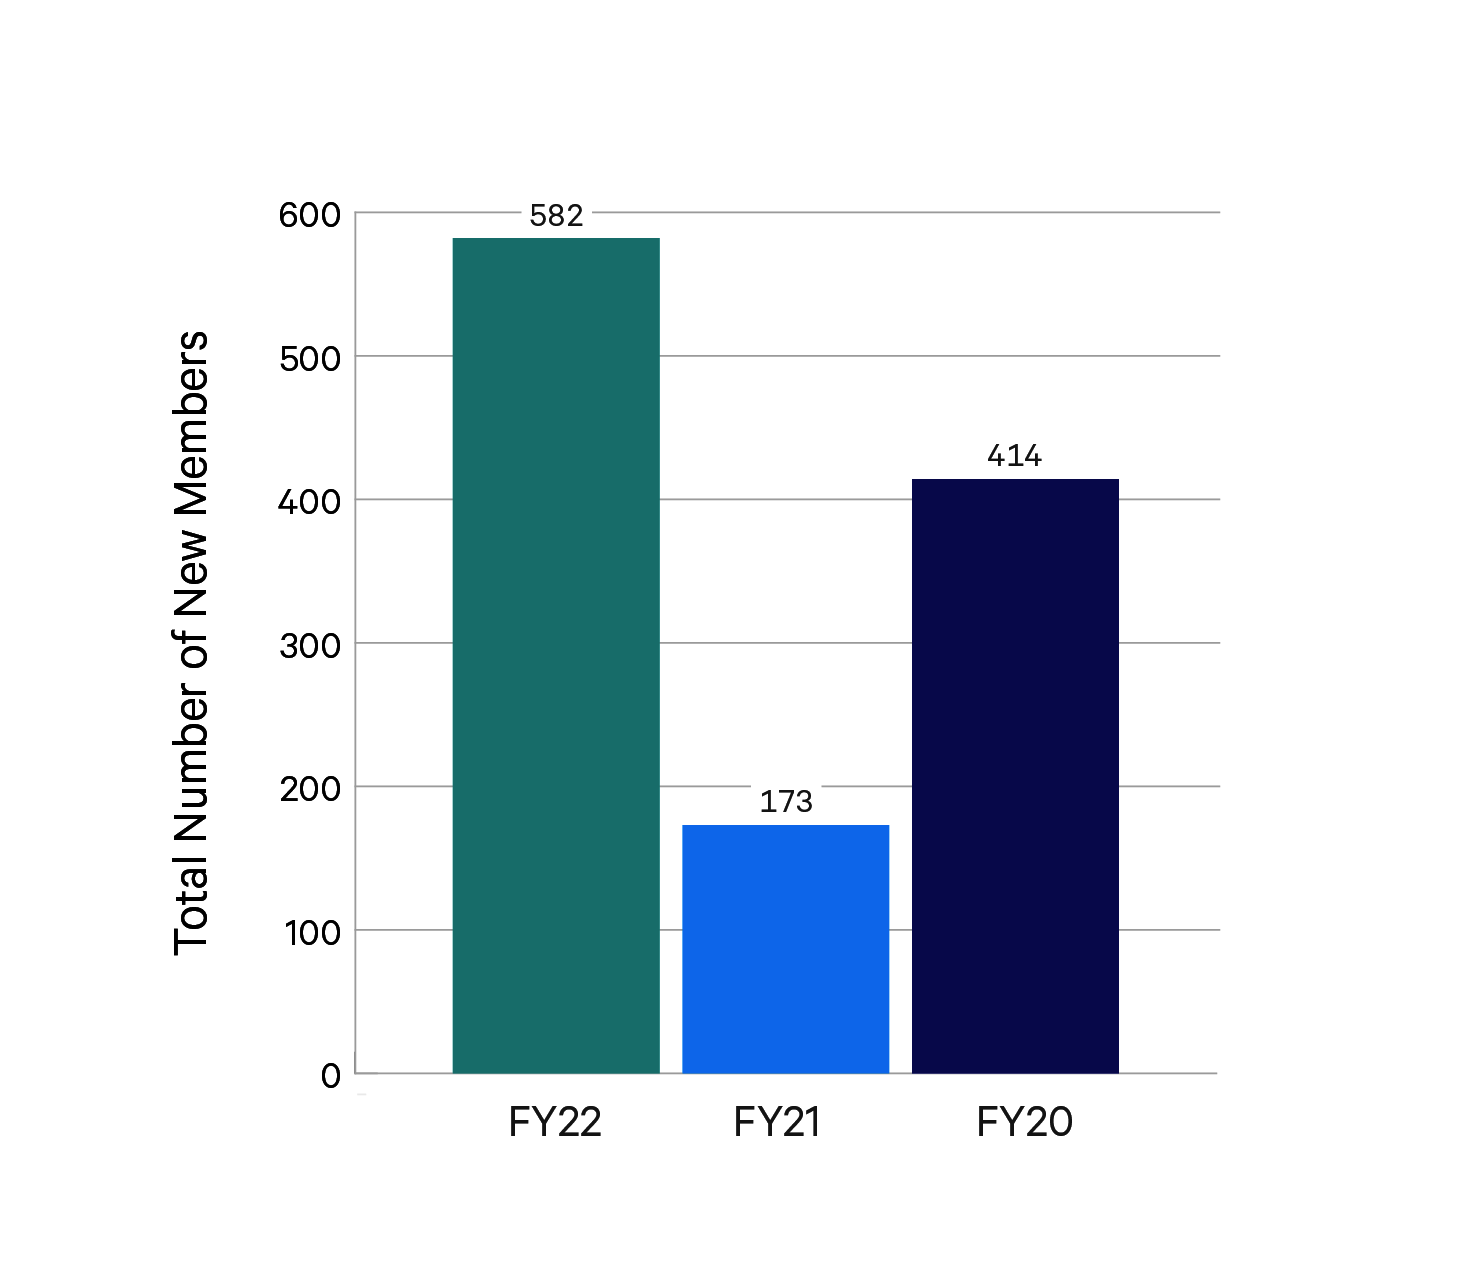 Bar chart with the Y-axis labeled “Total number of new members” and the X-axis labeled “FY22, FY21, and FY20”, showing that FY22 has 582 new members, FY21 has 173, and FY20 has 414. 